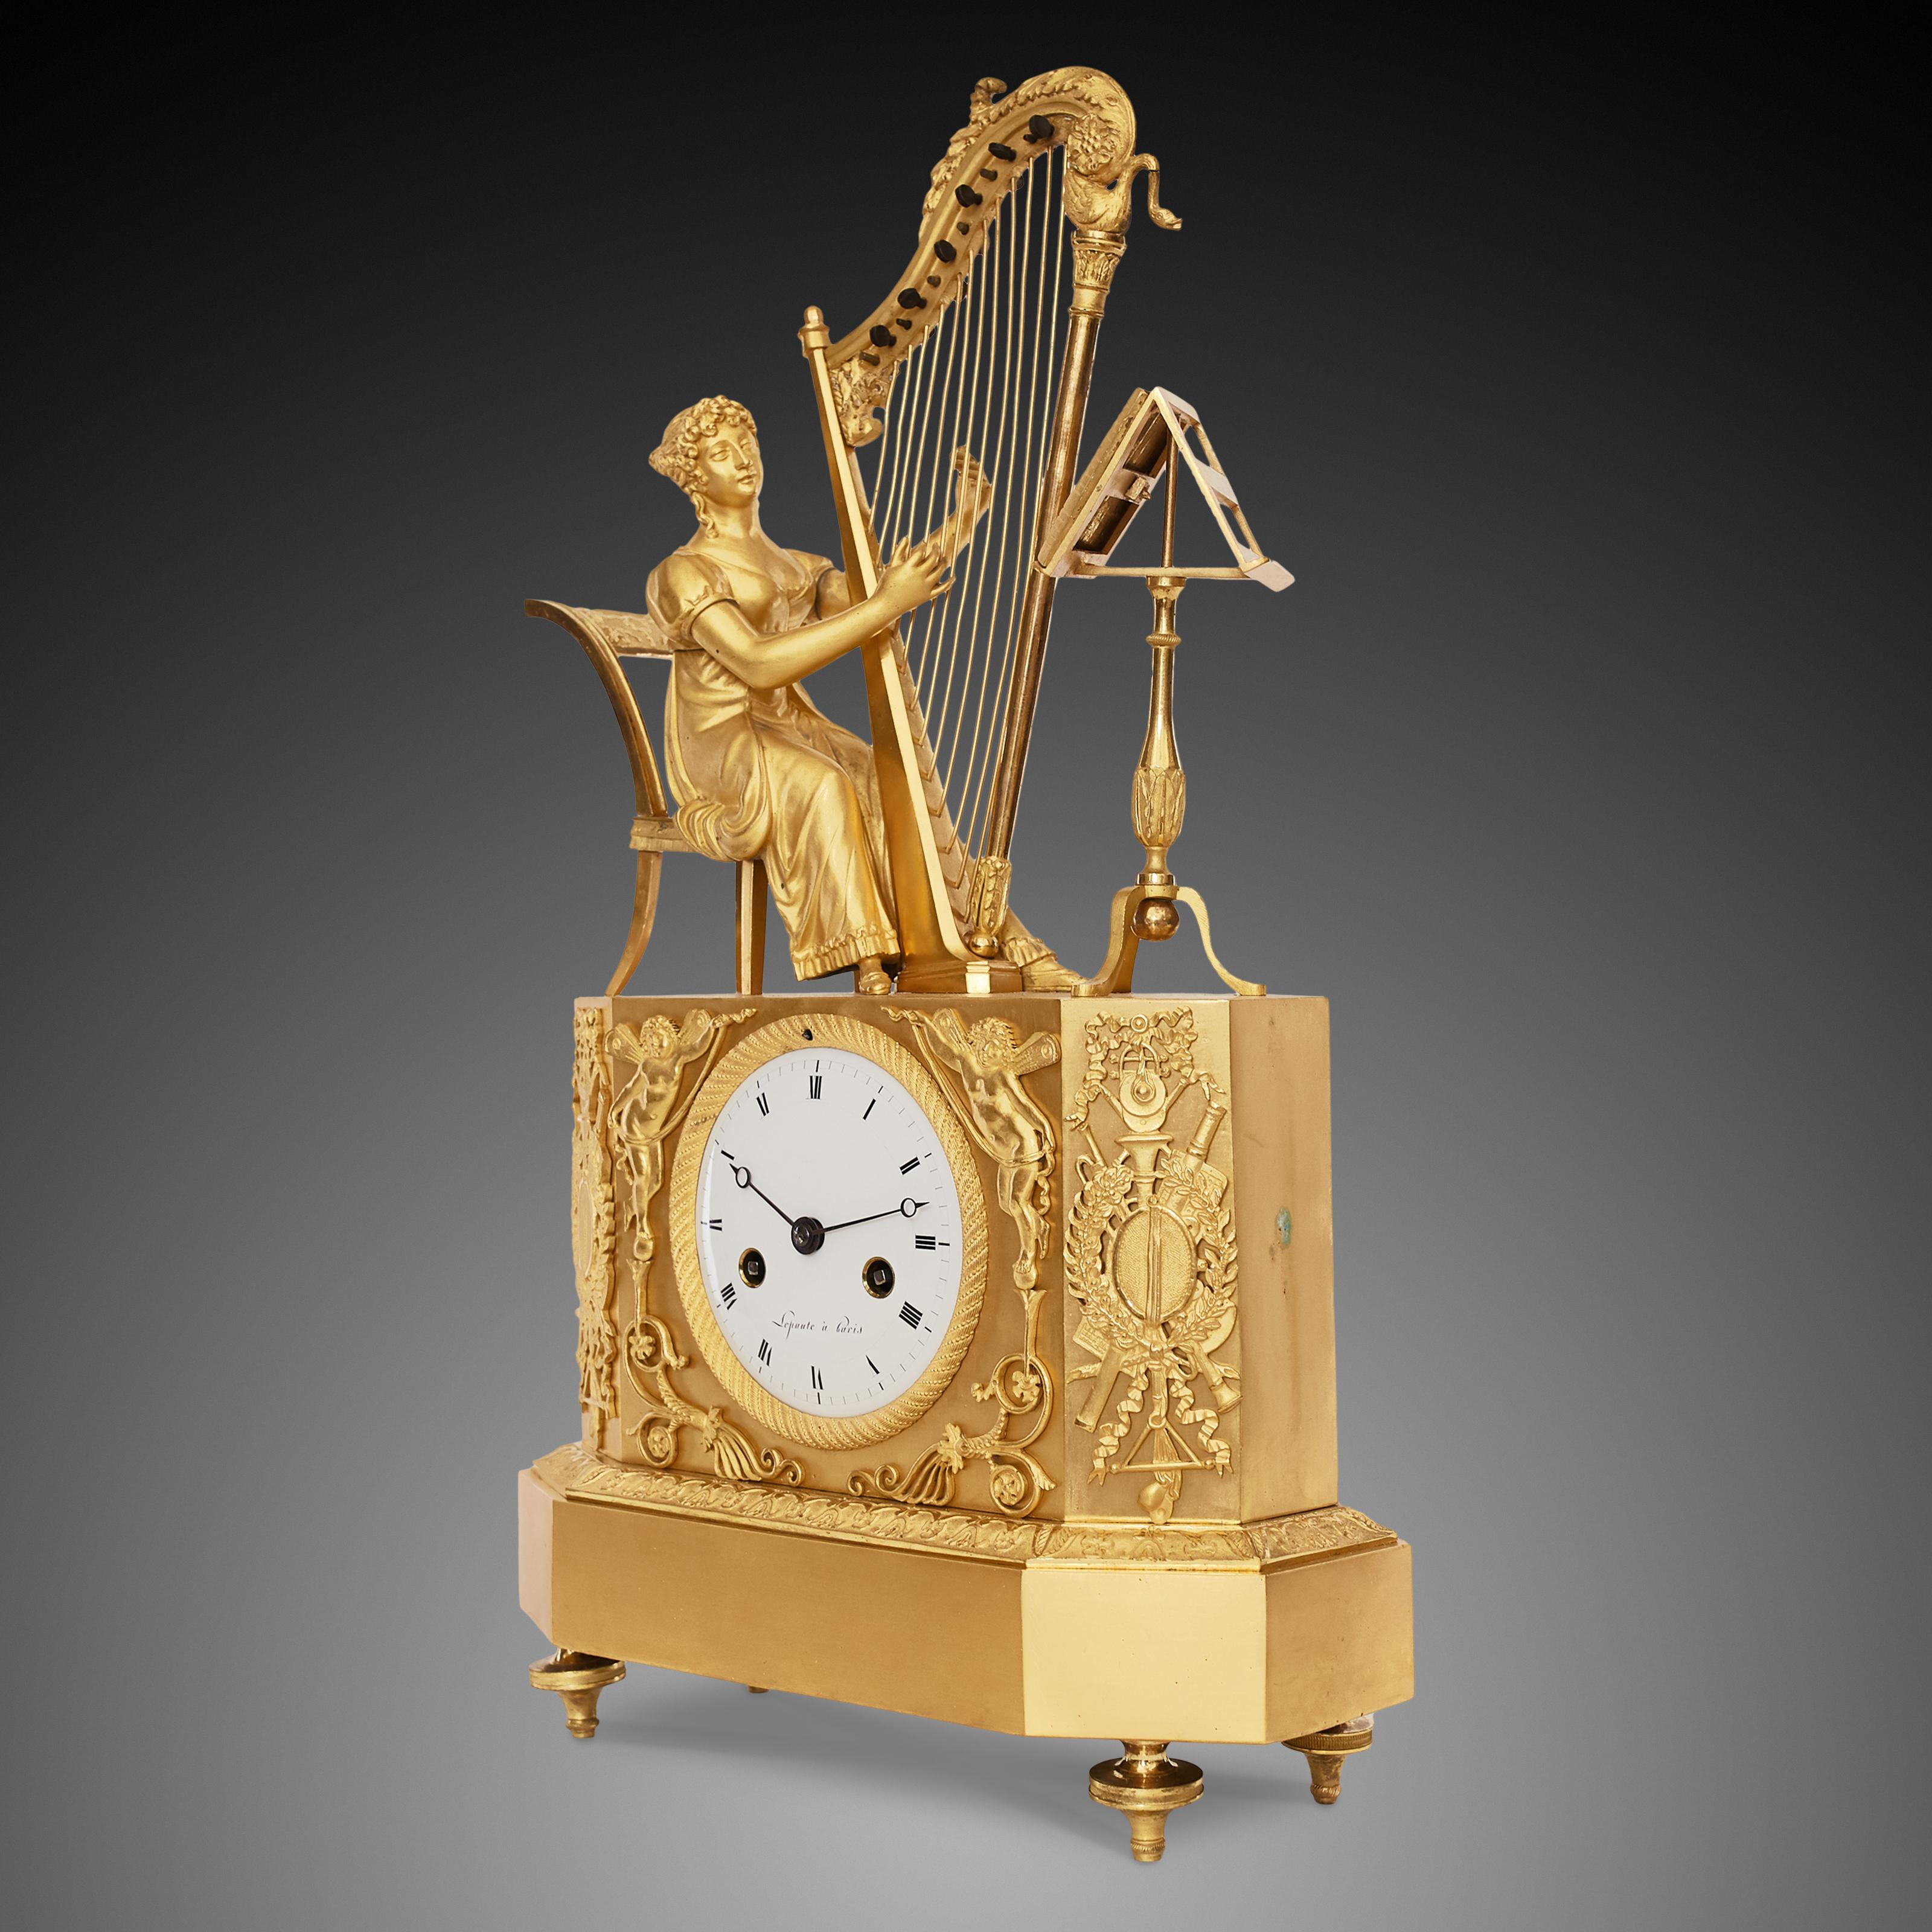 French Empire style mantel clock signed ‘Lepaute à Paris’
This refined mantel clock crafted in transitional Directoire - Empire style from ormolu bronze is signed on the dial “Lepaute à Paris”. The Empire and the Directoire style were based on